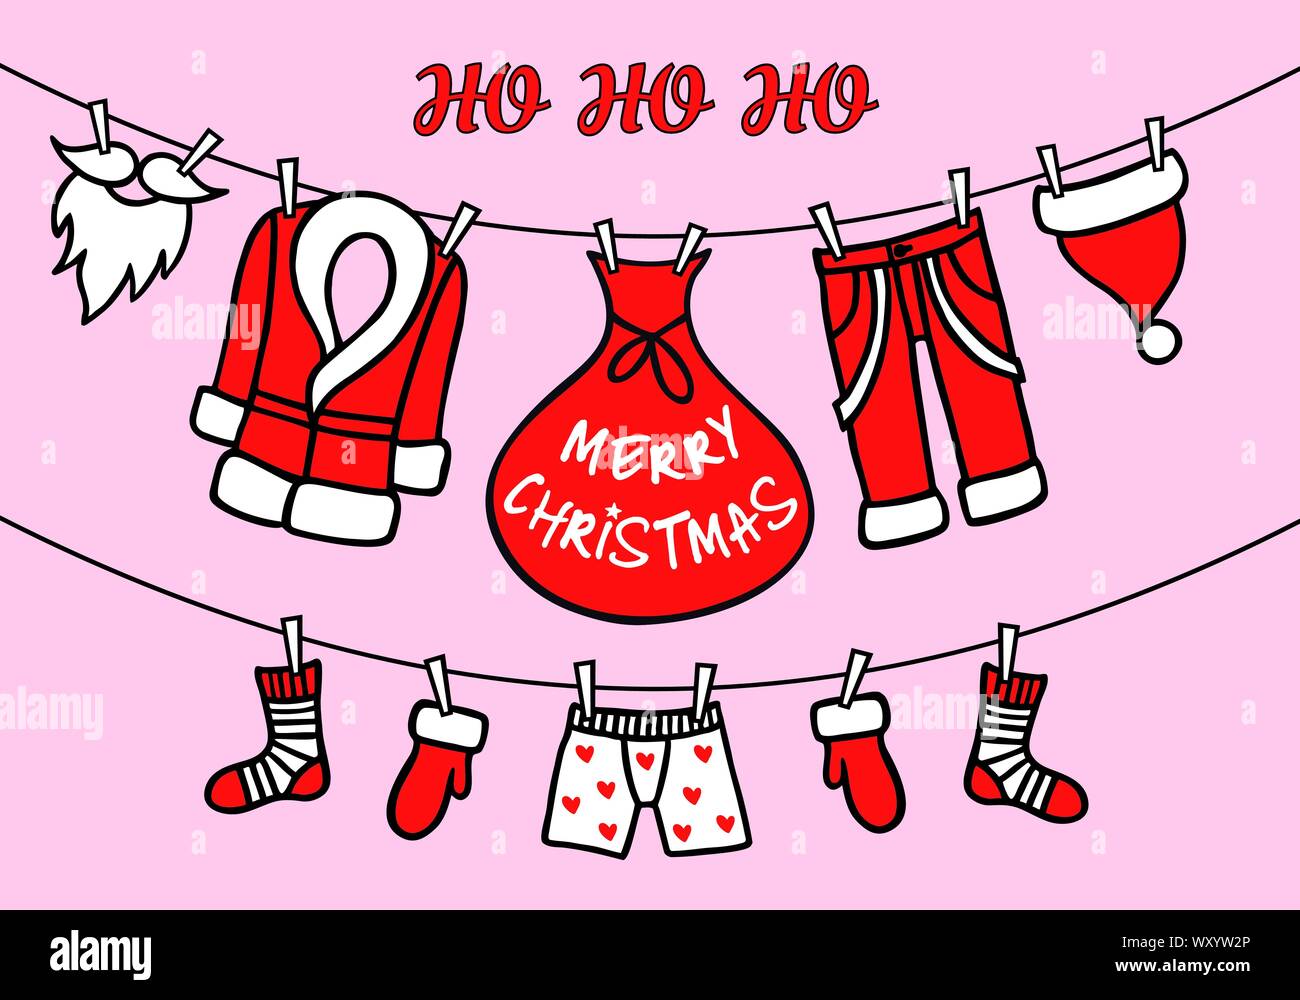 Pink Christmas card with Santa Claus clothes hanging on clothesline, vector graphic design elements Stock Vector